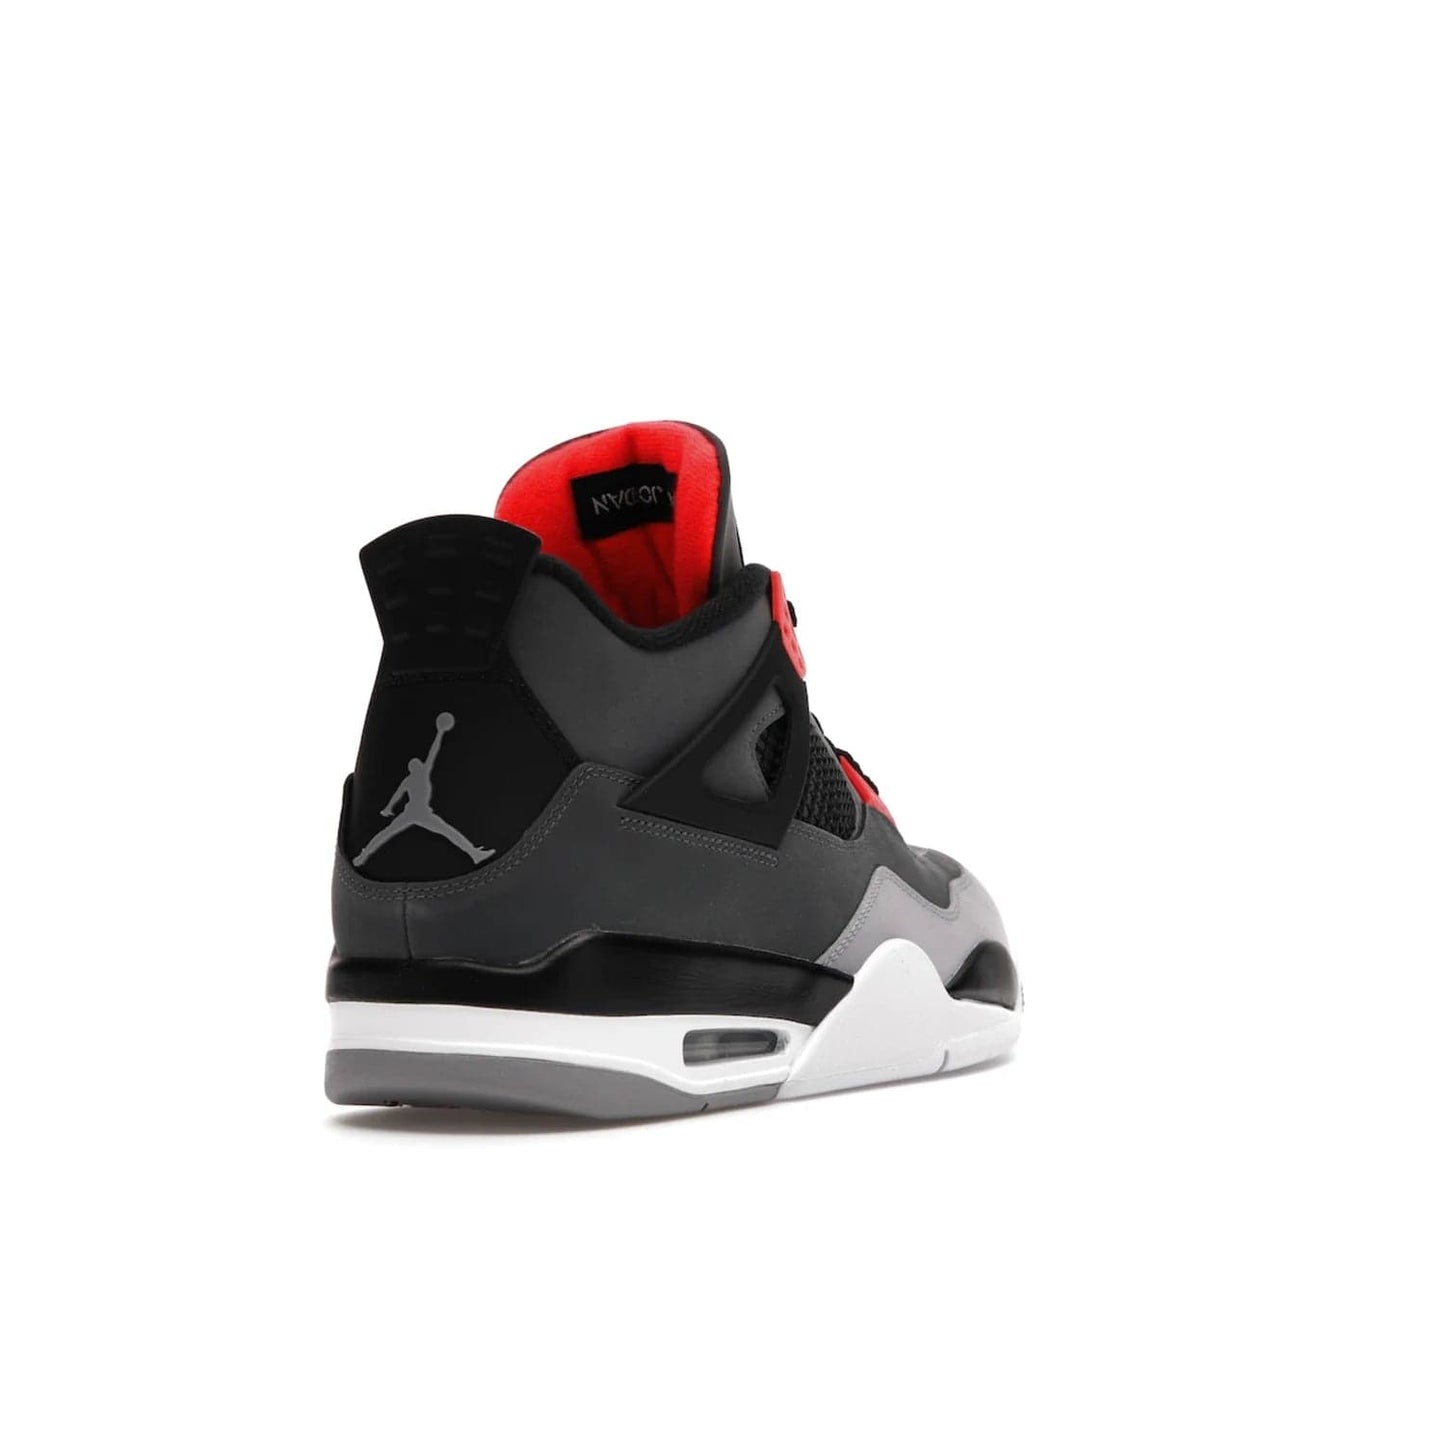 Jordan 4 Retro Infrared - Image 31 - Only at www.BallersClubKickz.com - Introducing the classic & timeless Air Jordan 4 Infrared. Durabuck upper, TPU mesh inserts, tech straps & heel tabs in dark grey and infrared accents. White sole with visible Air units. Out June 15, 2022. Get your pair now!